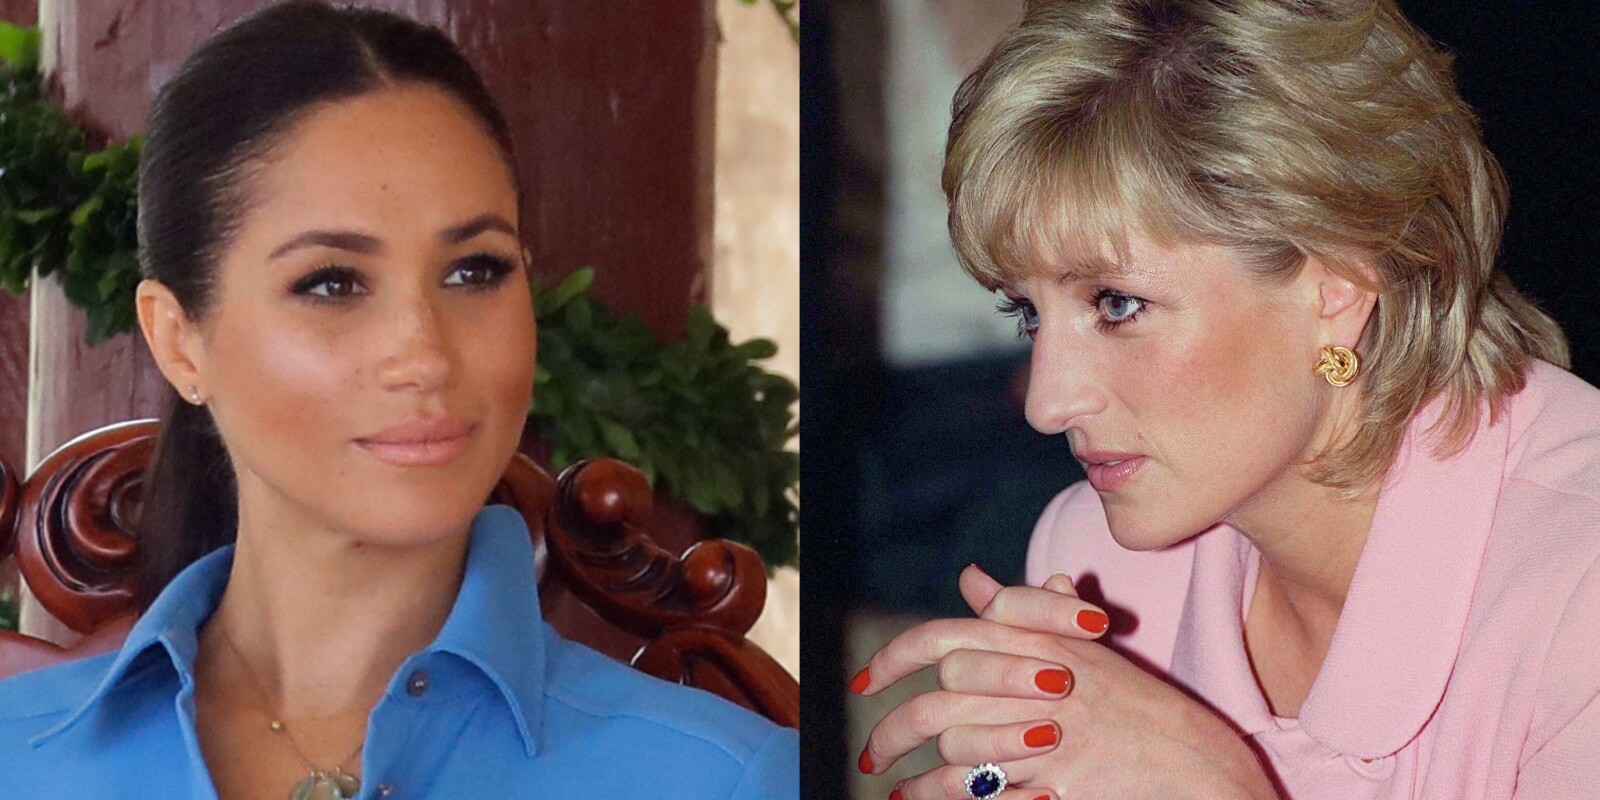 Meghan Markle and Princess Diana in side-by-side photographs.